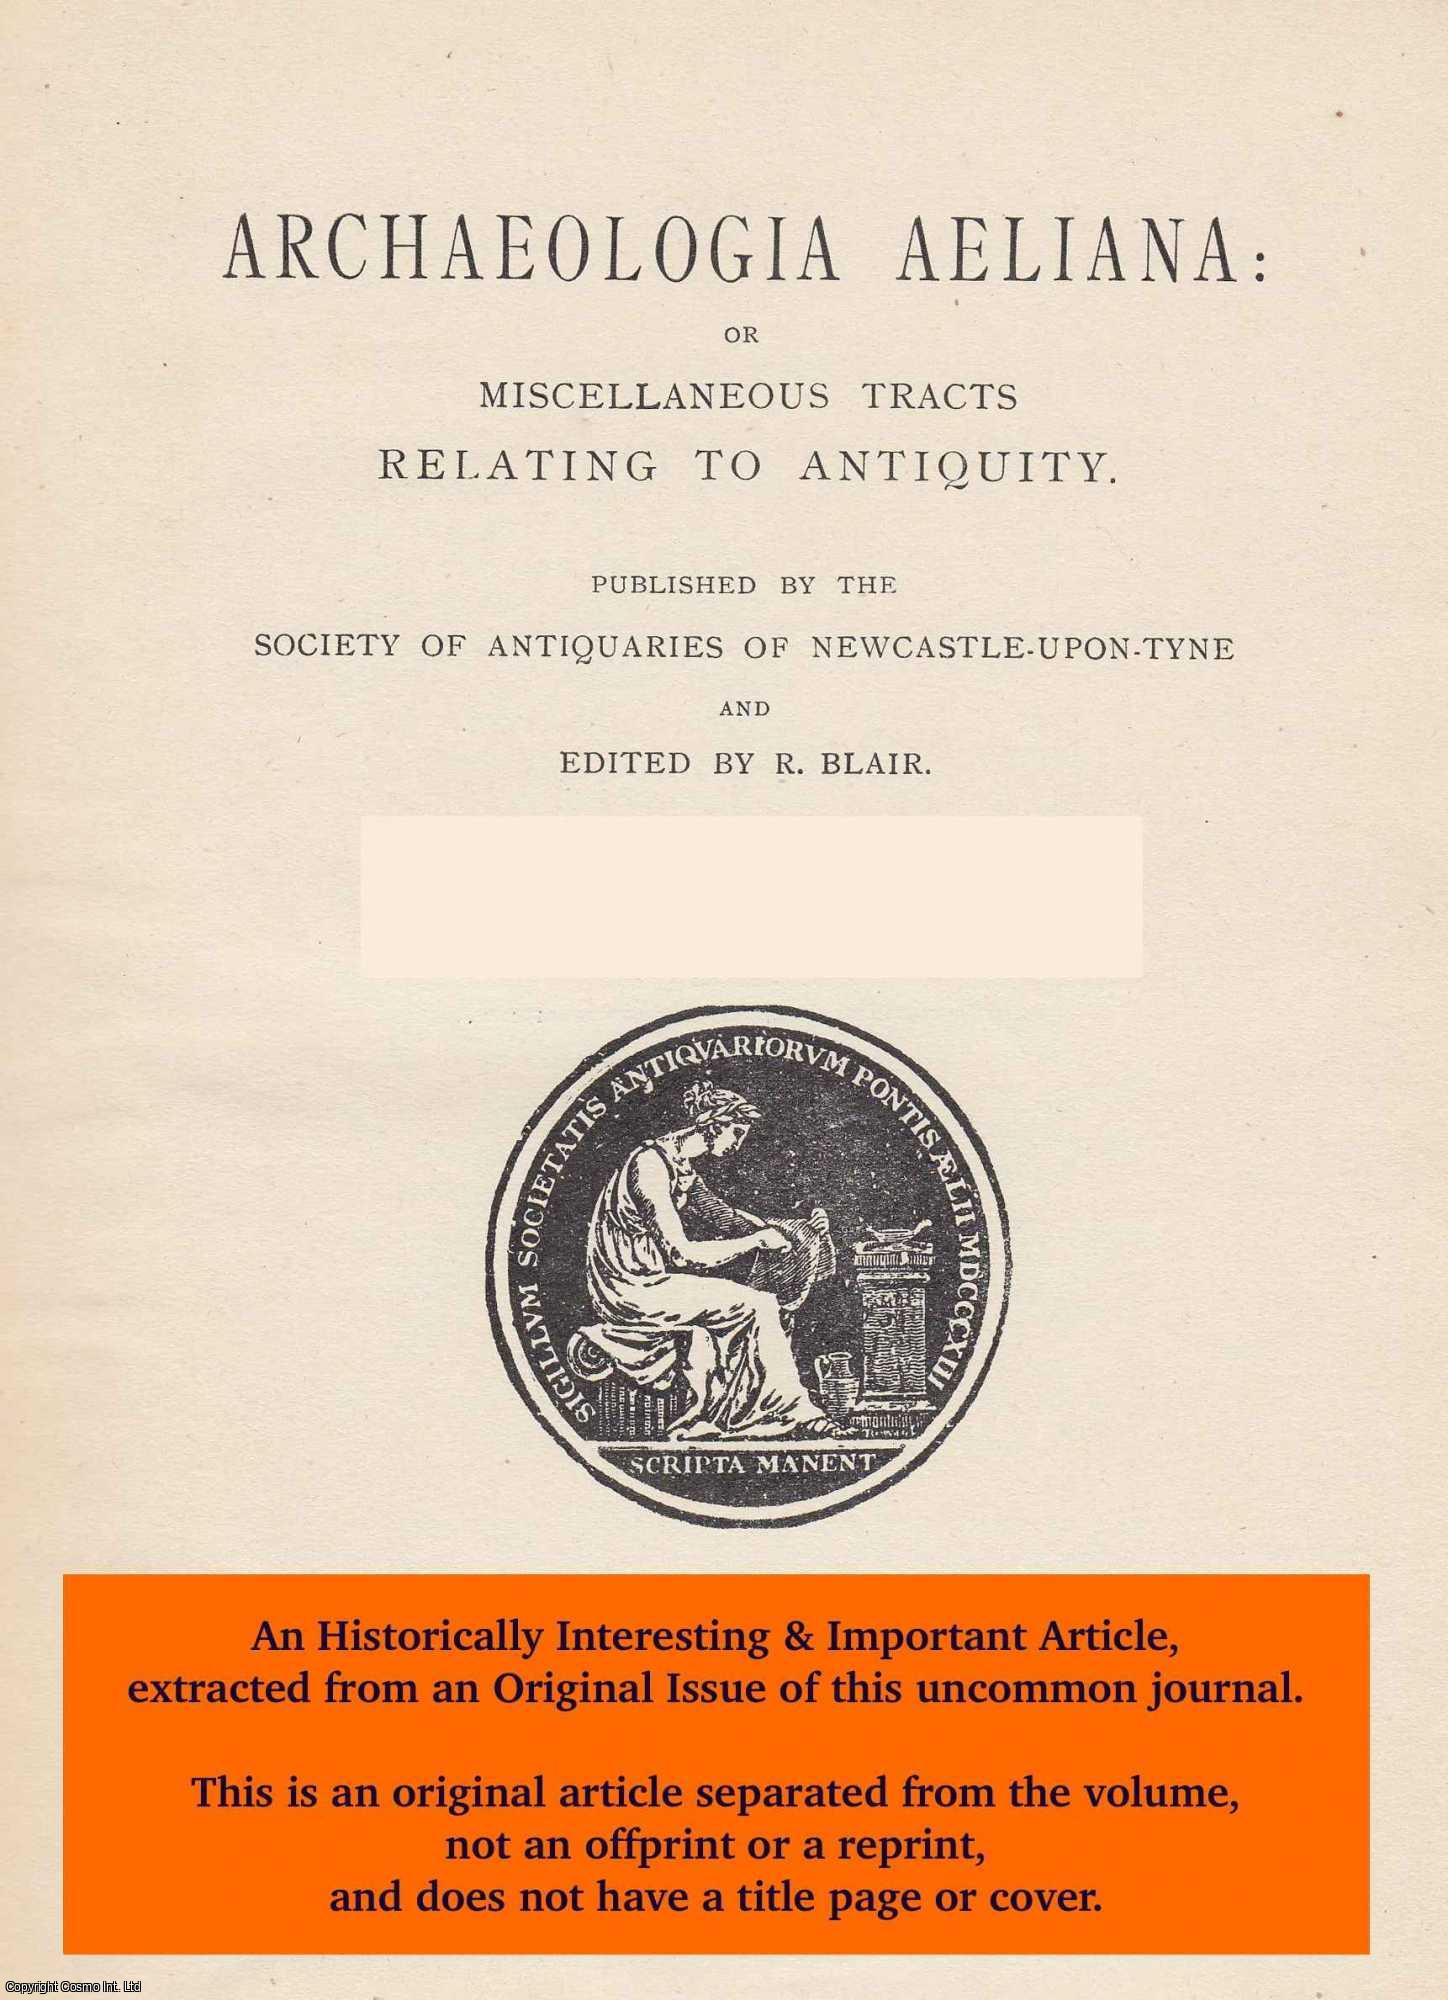 W. Percy Hedley, W. Percy - The Walbottle (Throckley) Hoard of Roman Coins. An original article from The Archaeologia Aeliana: or Miscellaneous Tracts Relating to Antiquity, 1931.